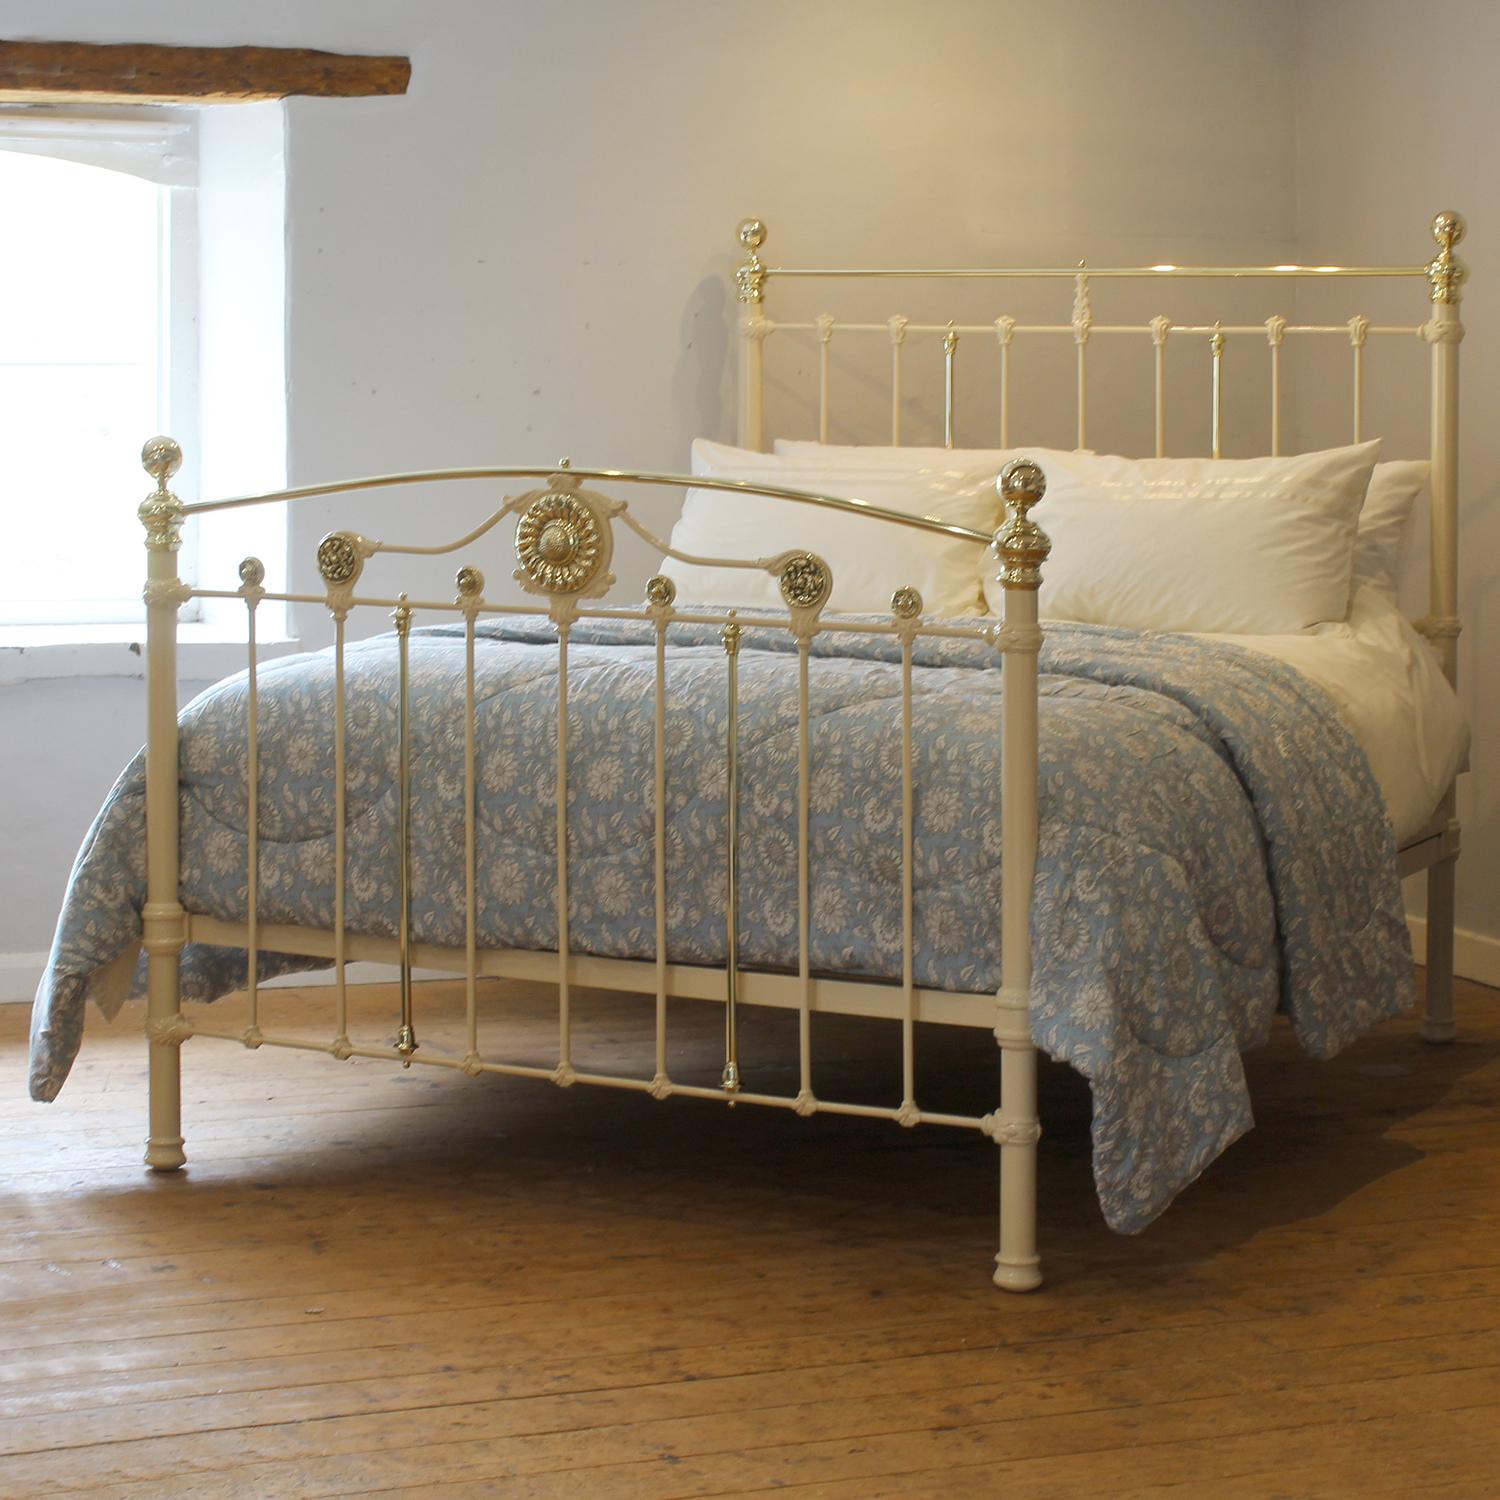 A superb cast iron antique bed finished in cream with decorative footboard displaying floral rosettes including a stunning central rossette of a sunflower..

This bed accepts a UK king size or US queen size (5ft, 60in or 150cm wide) base and